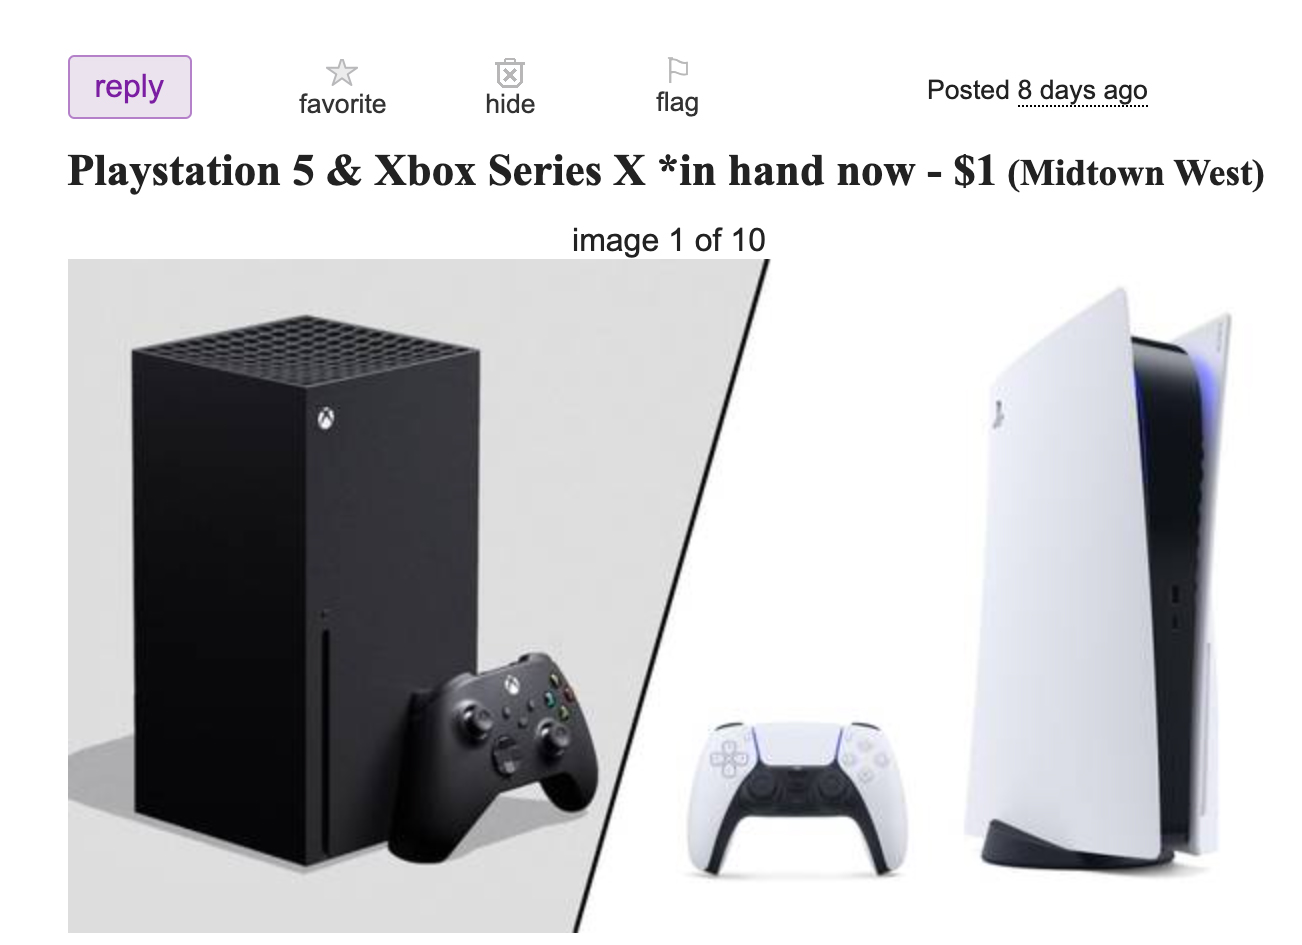 ps5 and xbox series x craigslist listing $1